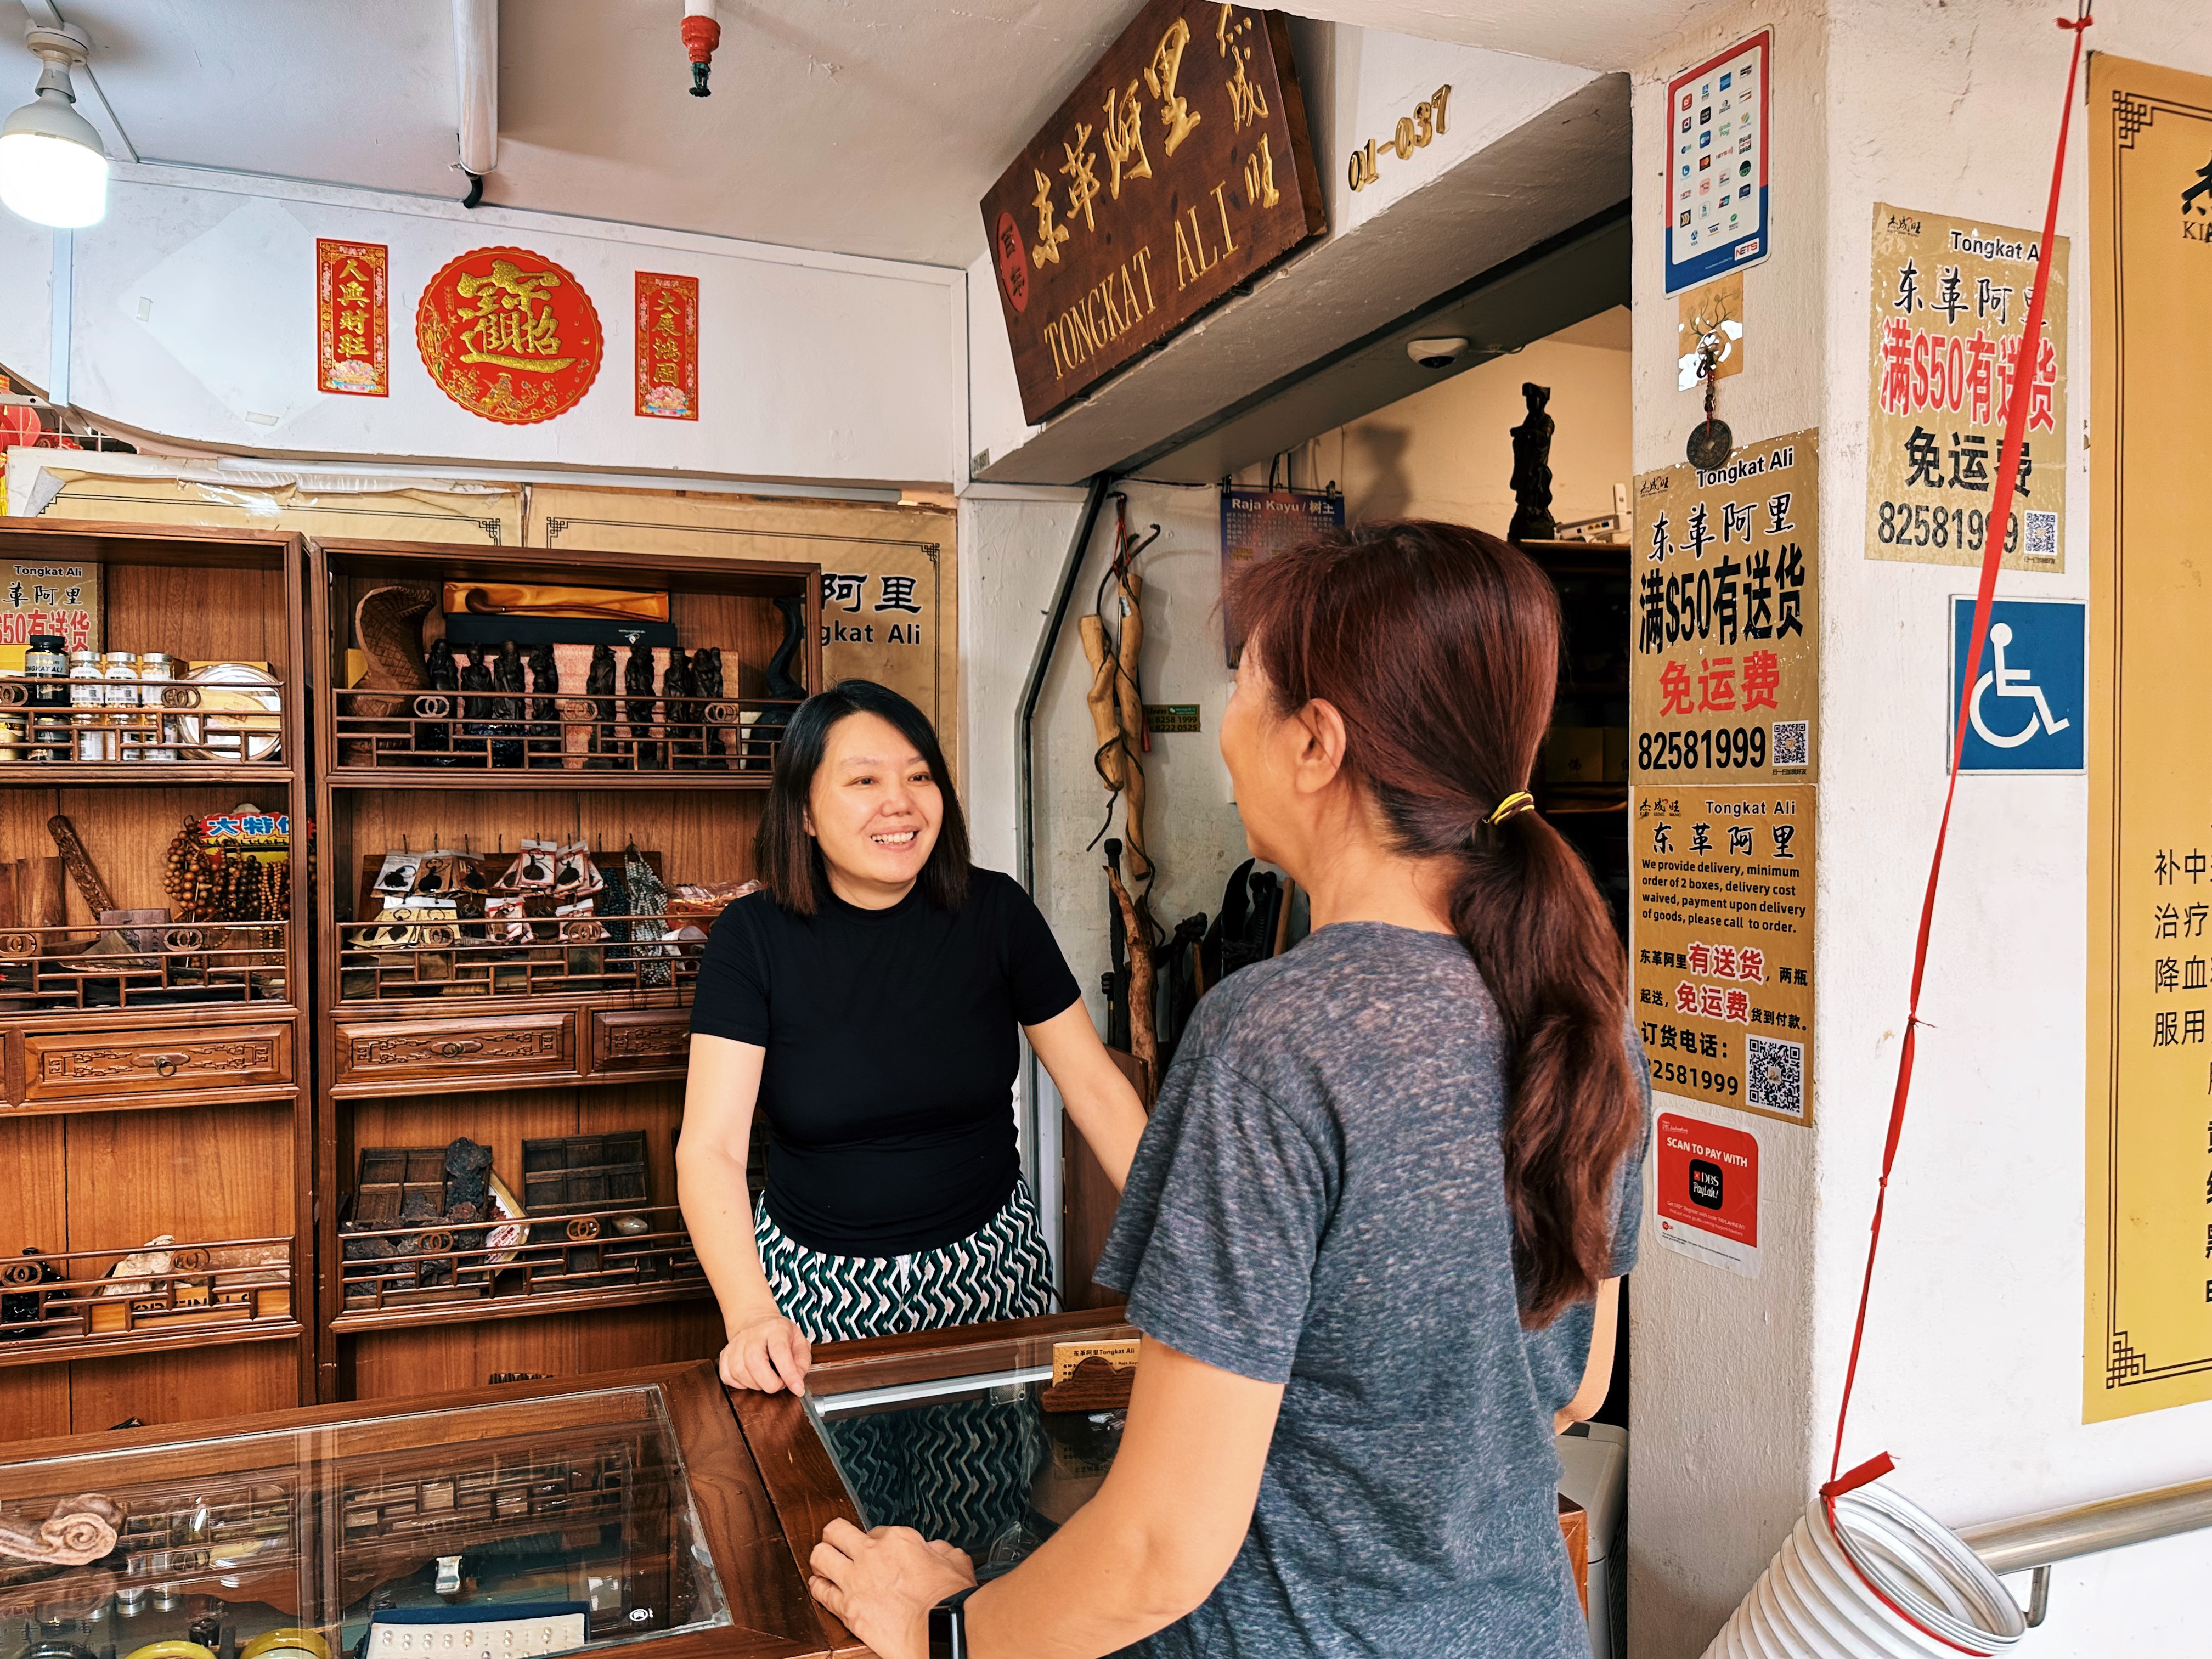 Wide shot of attendee talking with seller of the traditional “tongkat ali” aphrodisiac Yilin Wang over the counter